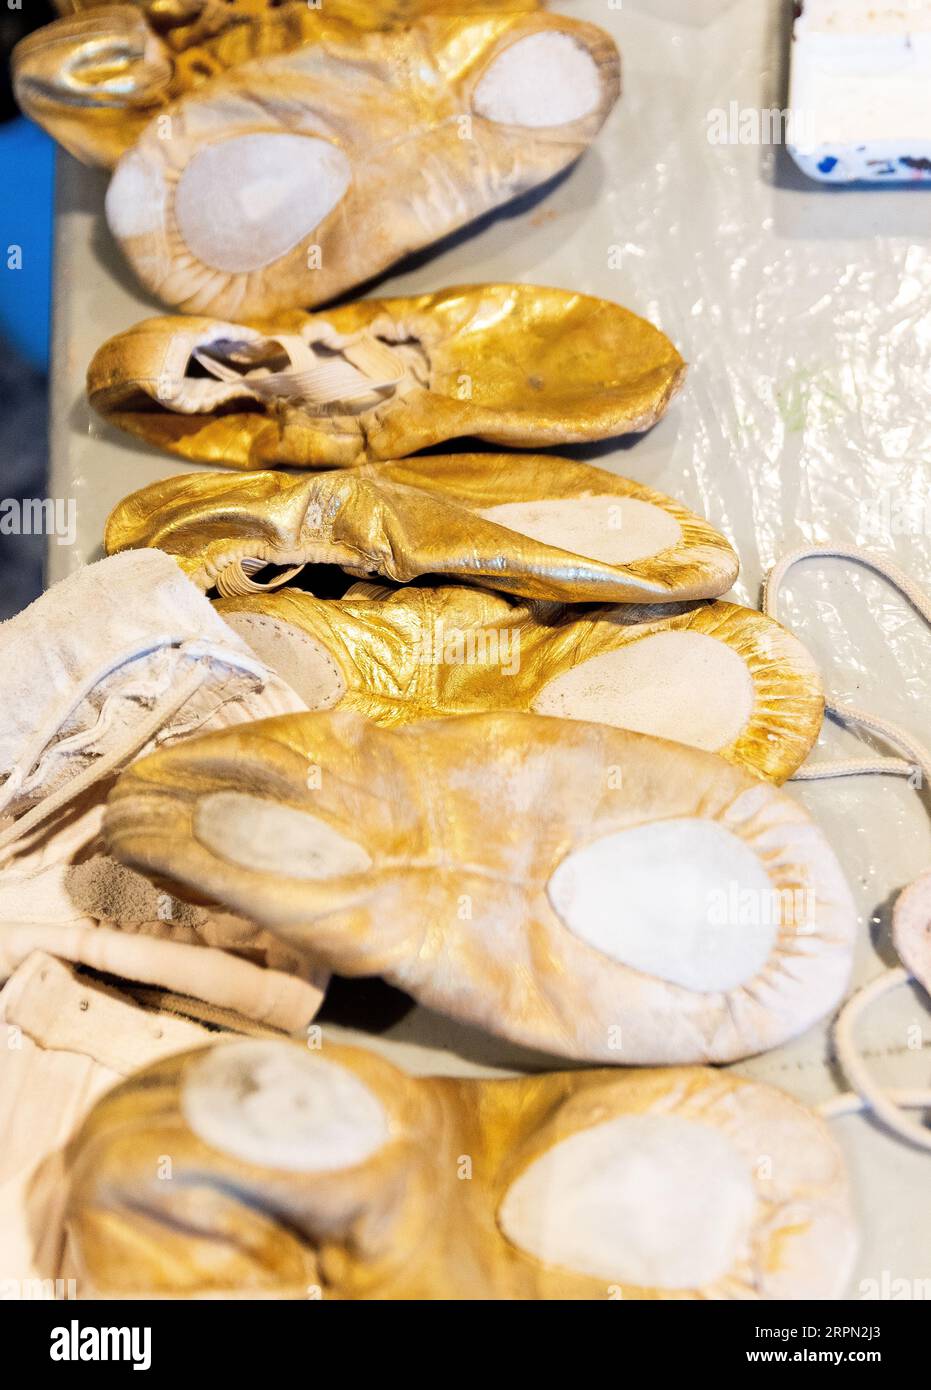 AMSTERDAM - Costumes during a backstage tour of the new Cirque du Soleil show. OVO can be seen in September at Ziggo Dome in Amsterdam and Ahoy in Rotterdam. ANP IRIS VAN DEN BROEK netherlands out - belgium out Stock Photo